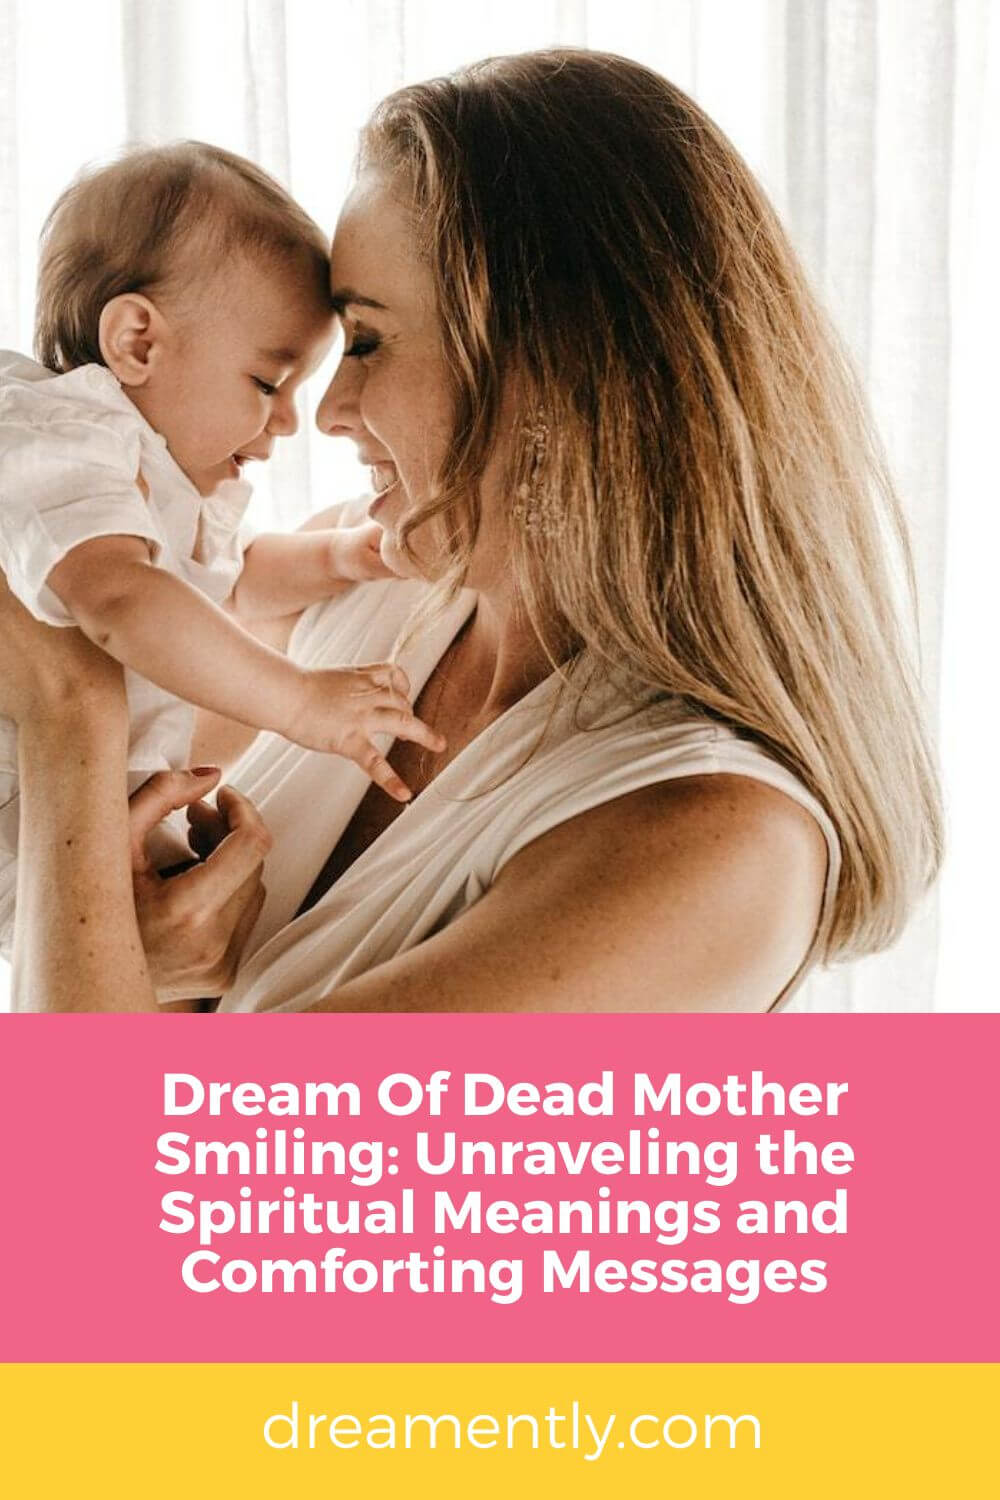 Dream Of Dead Mother Smiling- Unraveling the Spiritual Meanings and Comforting Messages (2)